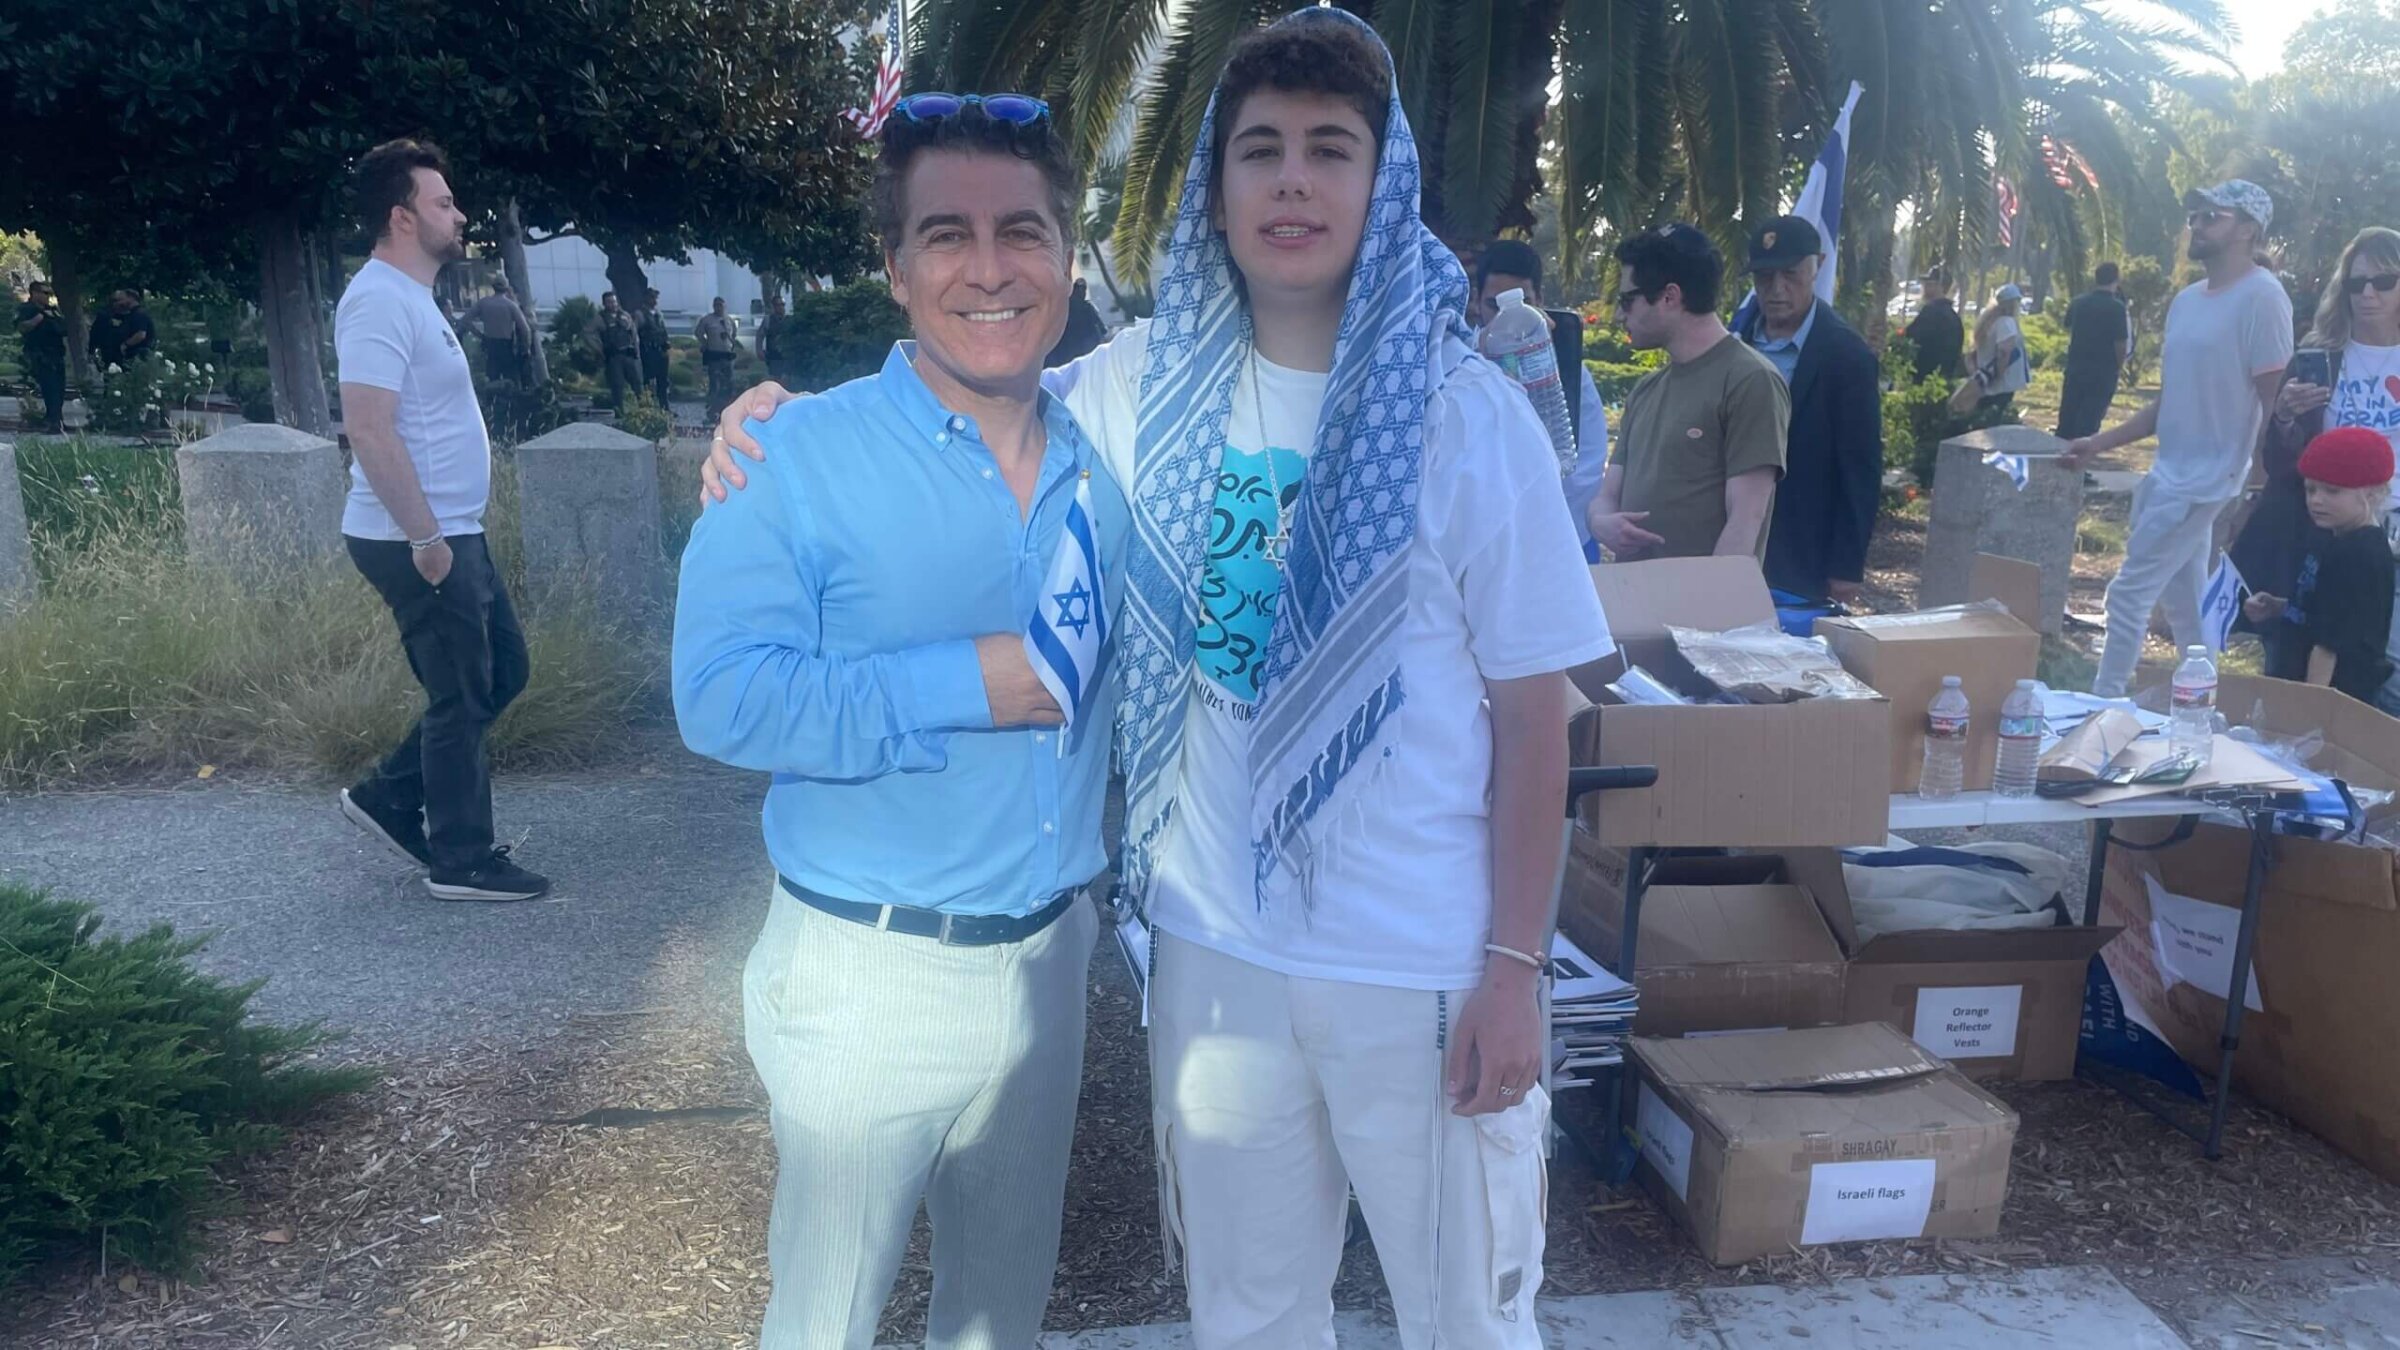 Gal Ben-Naim and his son Ari at an Israel rally in West Los Angeles. Ari's older brother David is a lone soldier in the IDF.